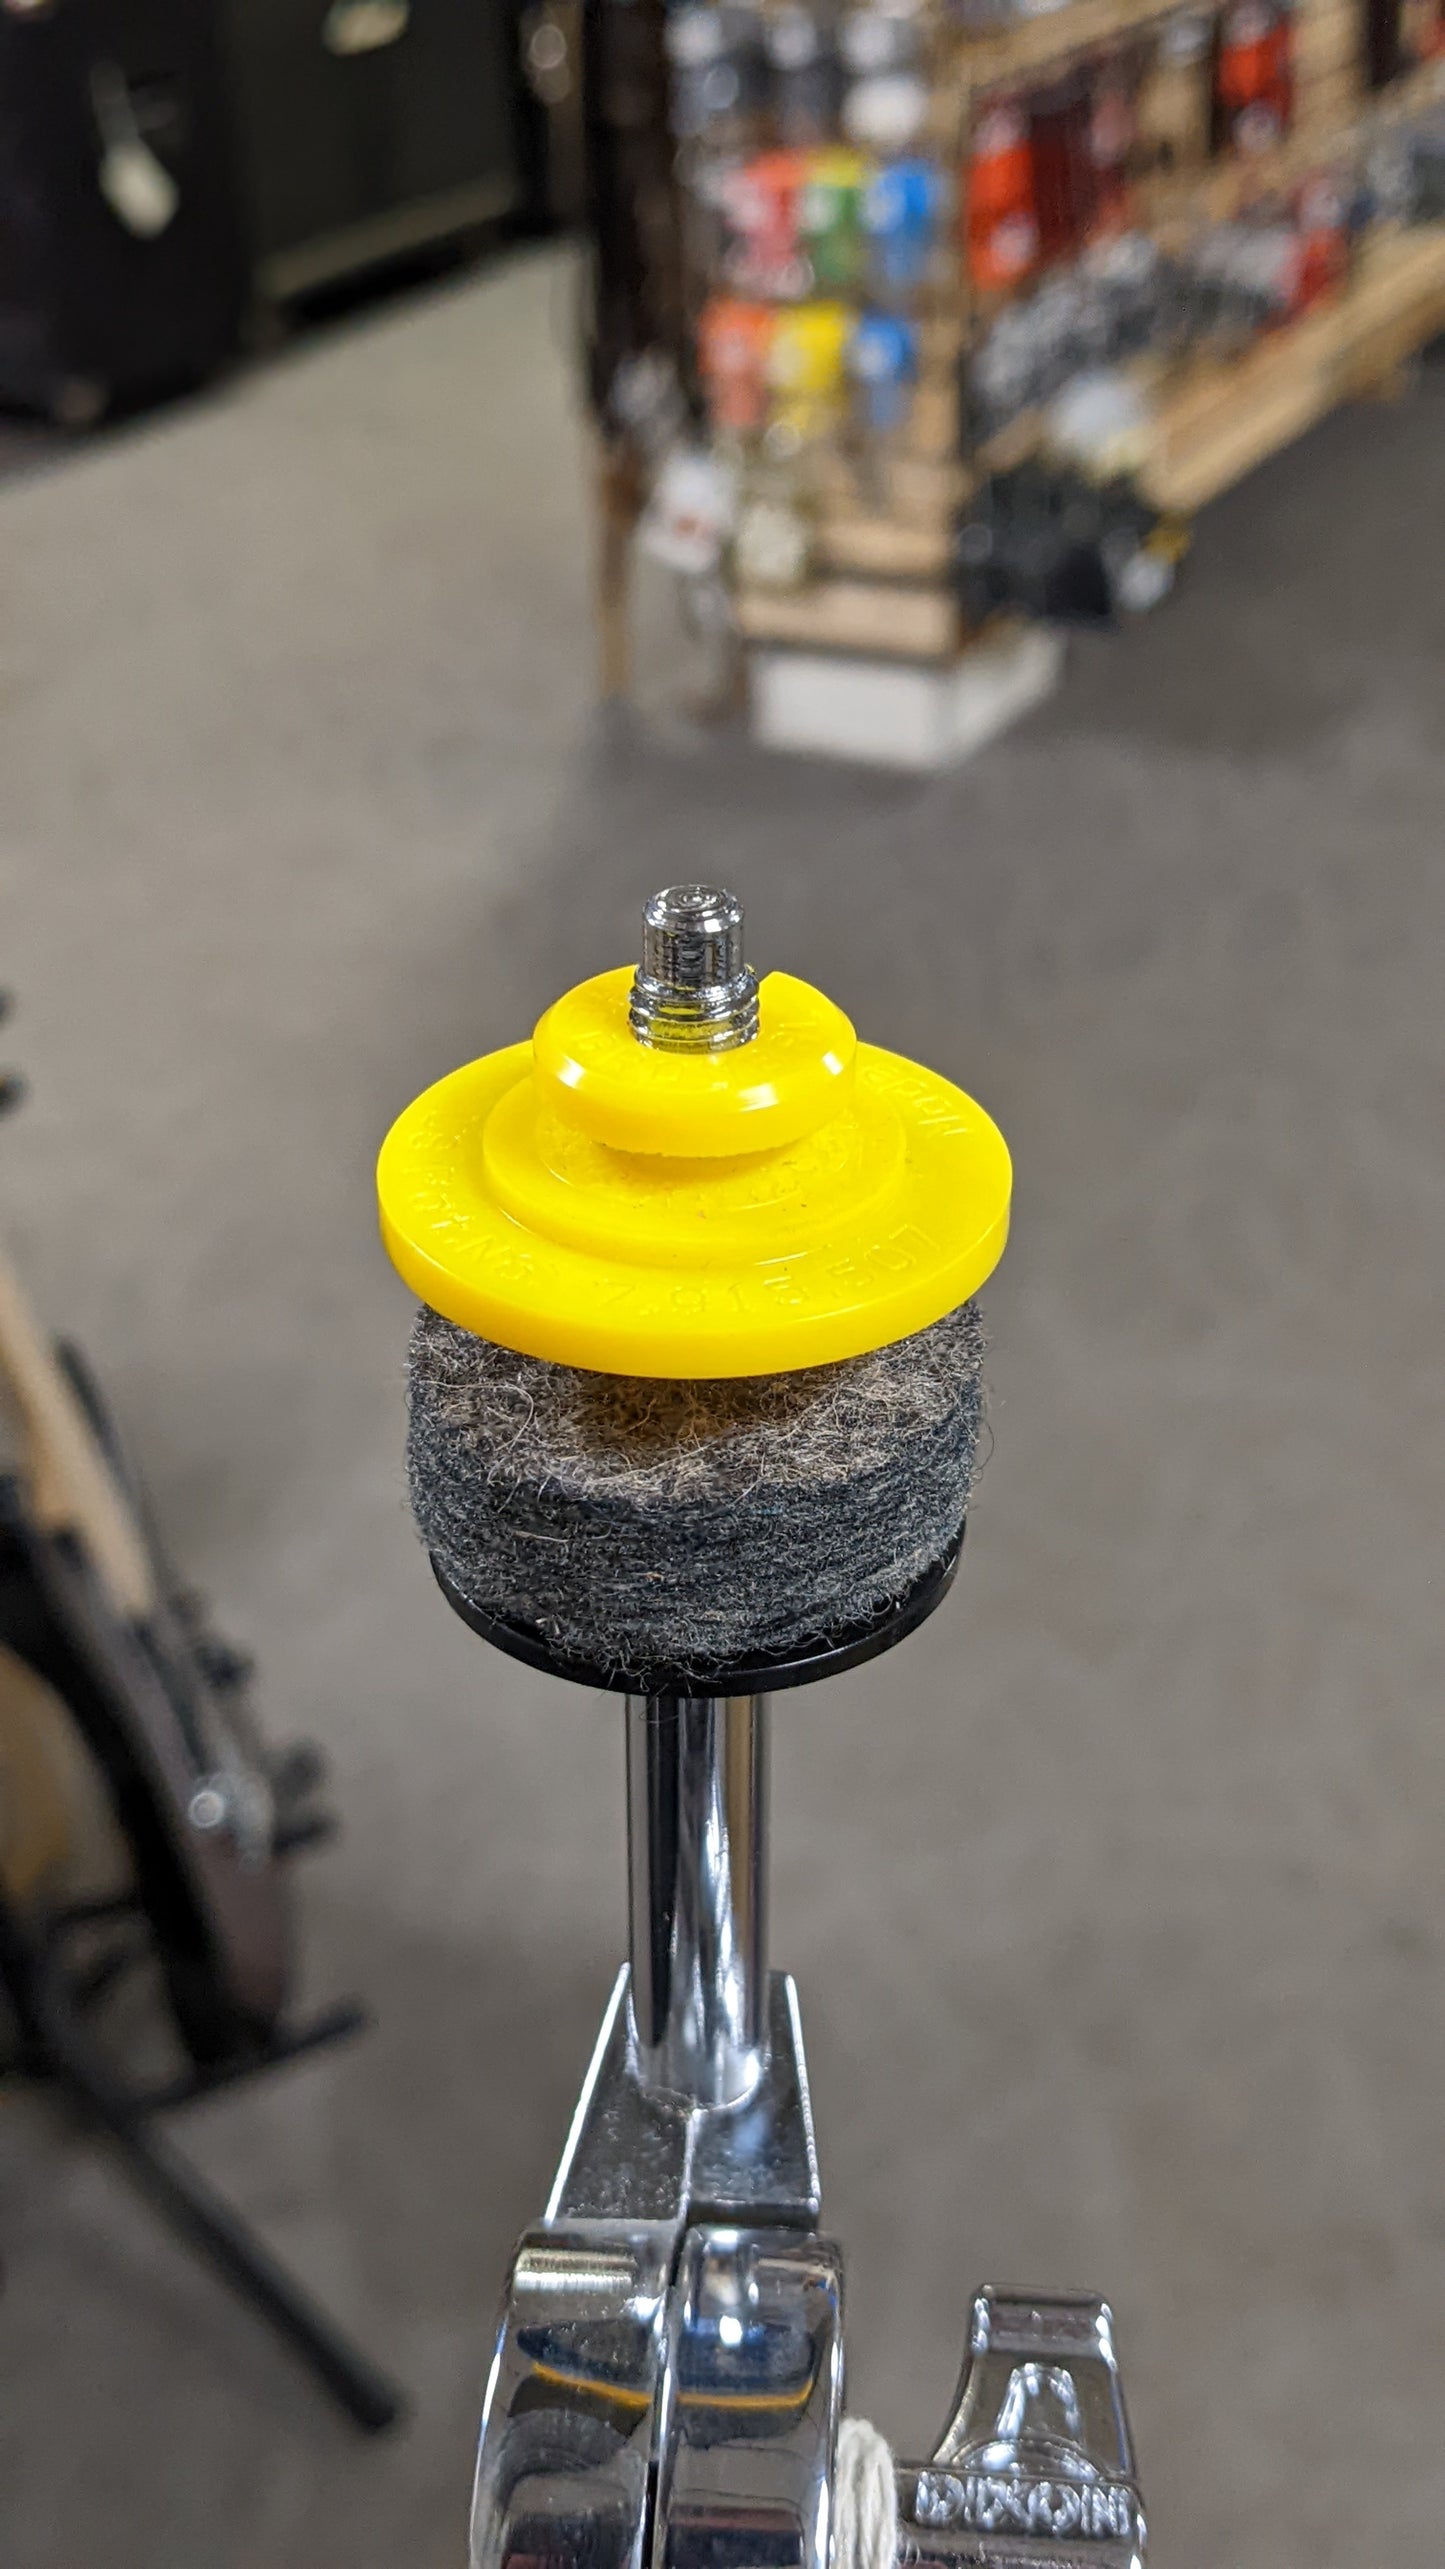 The Grombal Cymbal Mounting Grommet